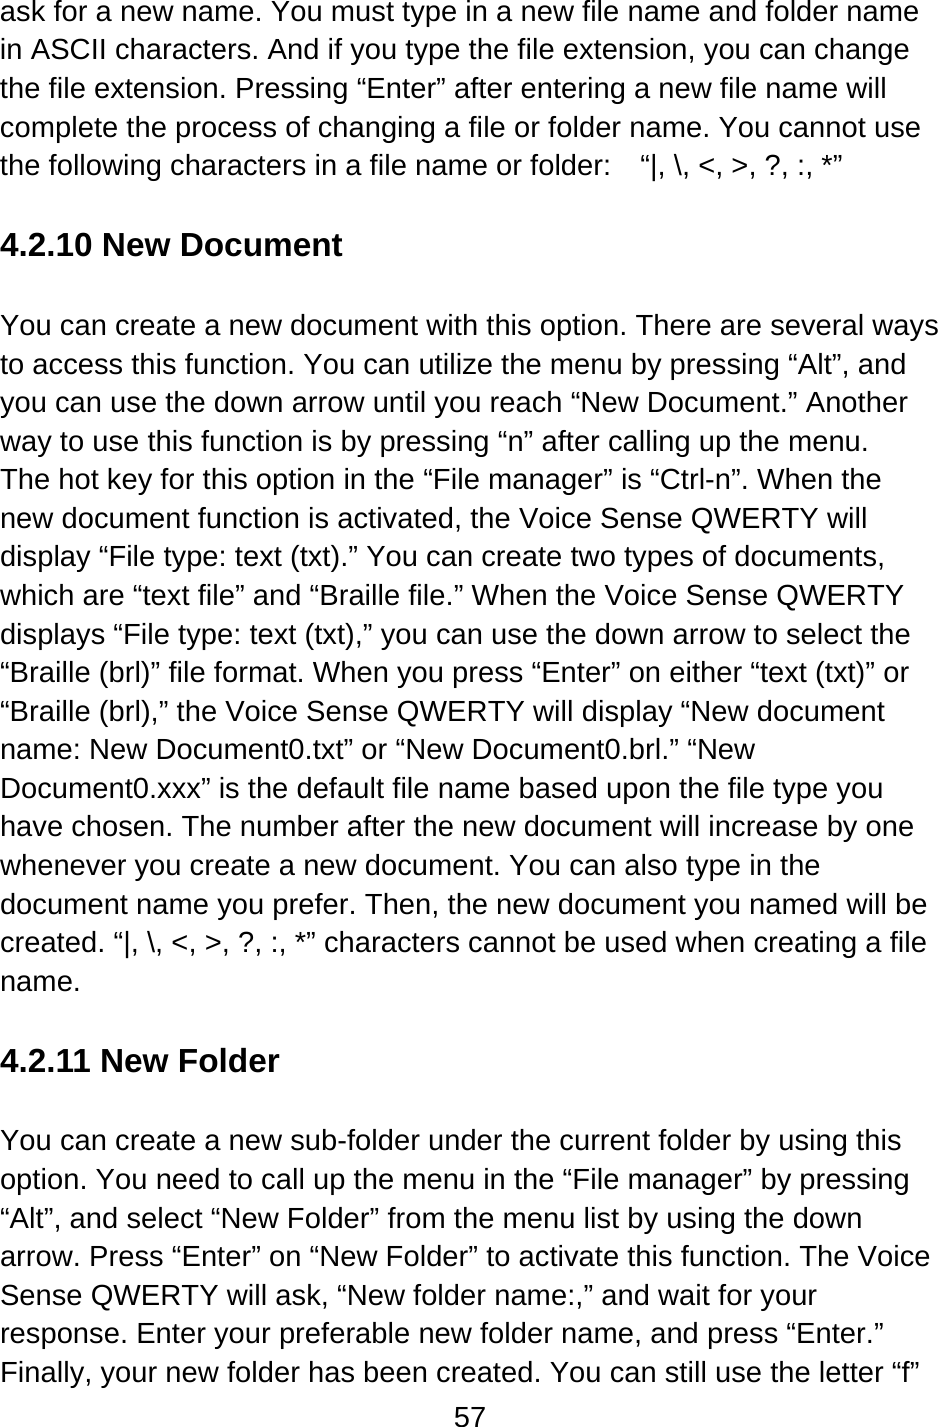 57  ask for a new name. You must type in a new file name and folder name in ASCII characters. And if you type the file extension, you can change the file extension. Pressing “Enter” after entering a new file name will complete the process of changing a file or folder name. You cannot use the following characters in a file name or folder:    “|, \, &lt;, &gt;, ?, :, *”  4.2.10 New Document  You can create a new document with this option. There are several ways to access this function. You can utilize the menu by pressing “Alt”, and you can use the down arrow until you reach “New Document.” Another way to use this function is by pressing “n” after calling up the menu.   The hot key for this option in the “File manager” is “Ctrl-n”. When the new document function is activated, the Voice Sense QWERTY will display “File type: text (txt).” You can create two types of documents, which are “text file” and “Braille file.” When the Voice Sense QWERTY displays “File type: text (txt),” you can use the down arrow to select the “Braille (brl)” file format. When you press “Enter” on either “text (txt)” or “Braille (brl),” the Voice Sense QWERTY will display “New document name: New Document0.txt” or “New Document0.brl.” “New Document0.xxx” is the default file name based upon the file type you have chosen. The number after the new document will increase by one whenever you create a new document. You can also type in the document name you prefer. Then, the new document you named will be created. “|, \, &lt;, &gt;, ?, :, *” characters cannot be used when creating a file name.  4.2.11 New Folder  You can create a new sub-folder under the current folder by using this option. You need to call up the menu in the “File manager” by pressing “Alt”, and select “New Folder” from the menu list by using the down arrow. Press “Enter” on “New Folder” to activate this function. The Voice Sense QWERTY will ask, “New folder name:,” and wait for your response. Enter your preferable new folder name, and press “Enter.” Finally, your new folder has been created. You can still use the letter “f” 